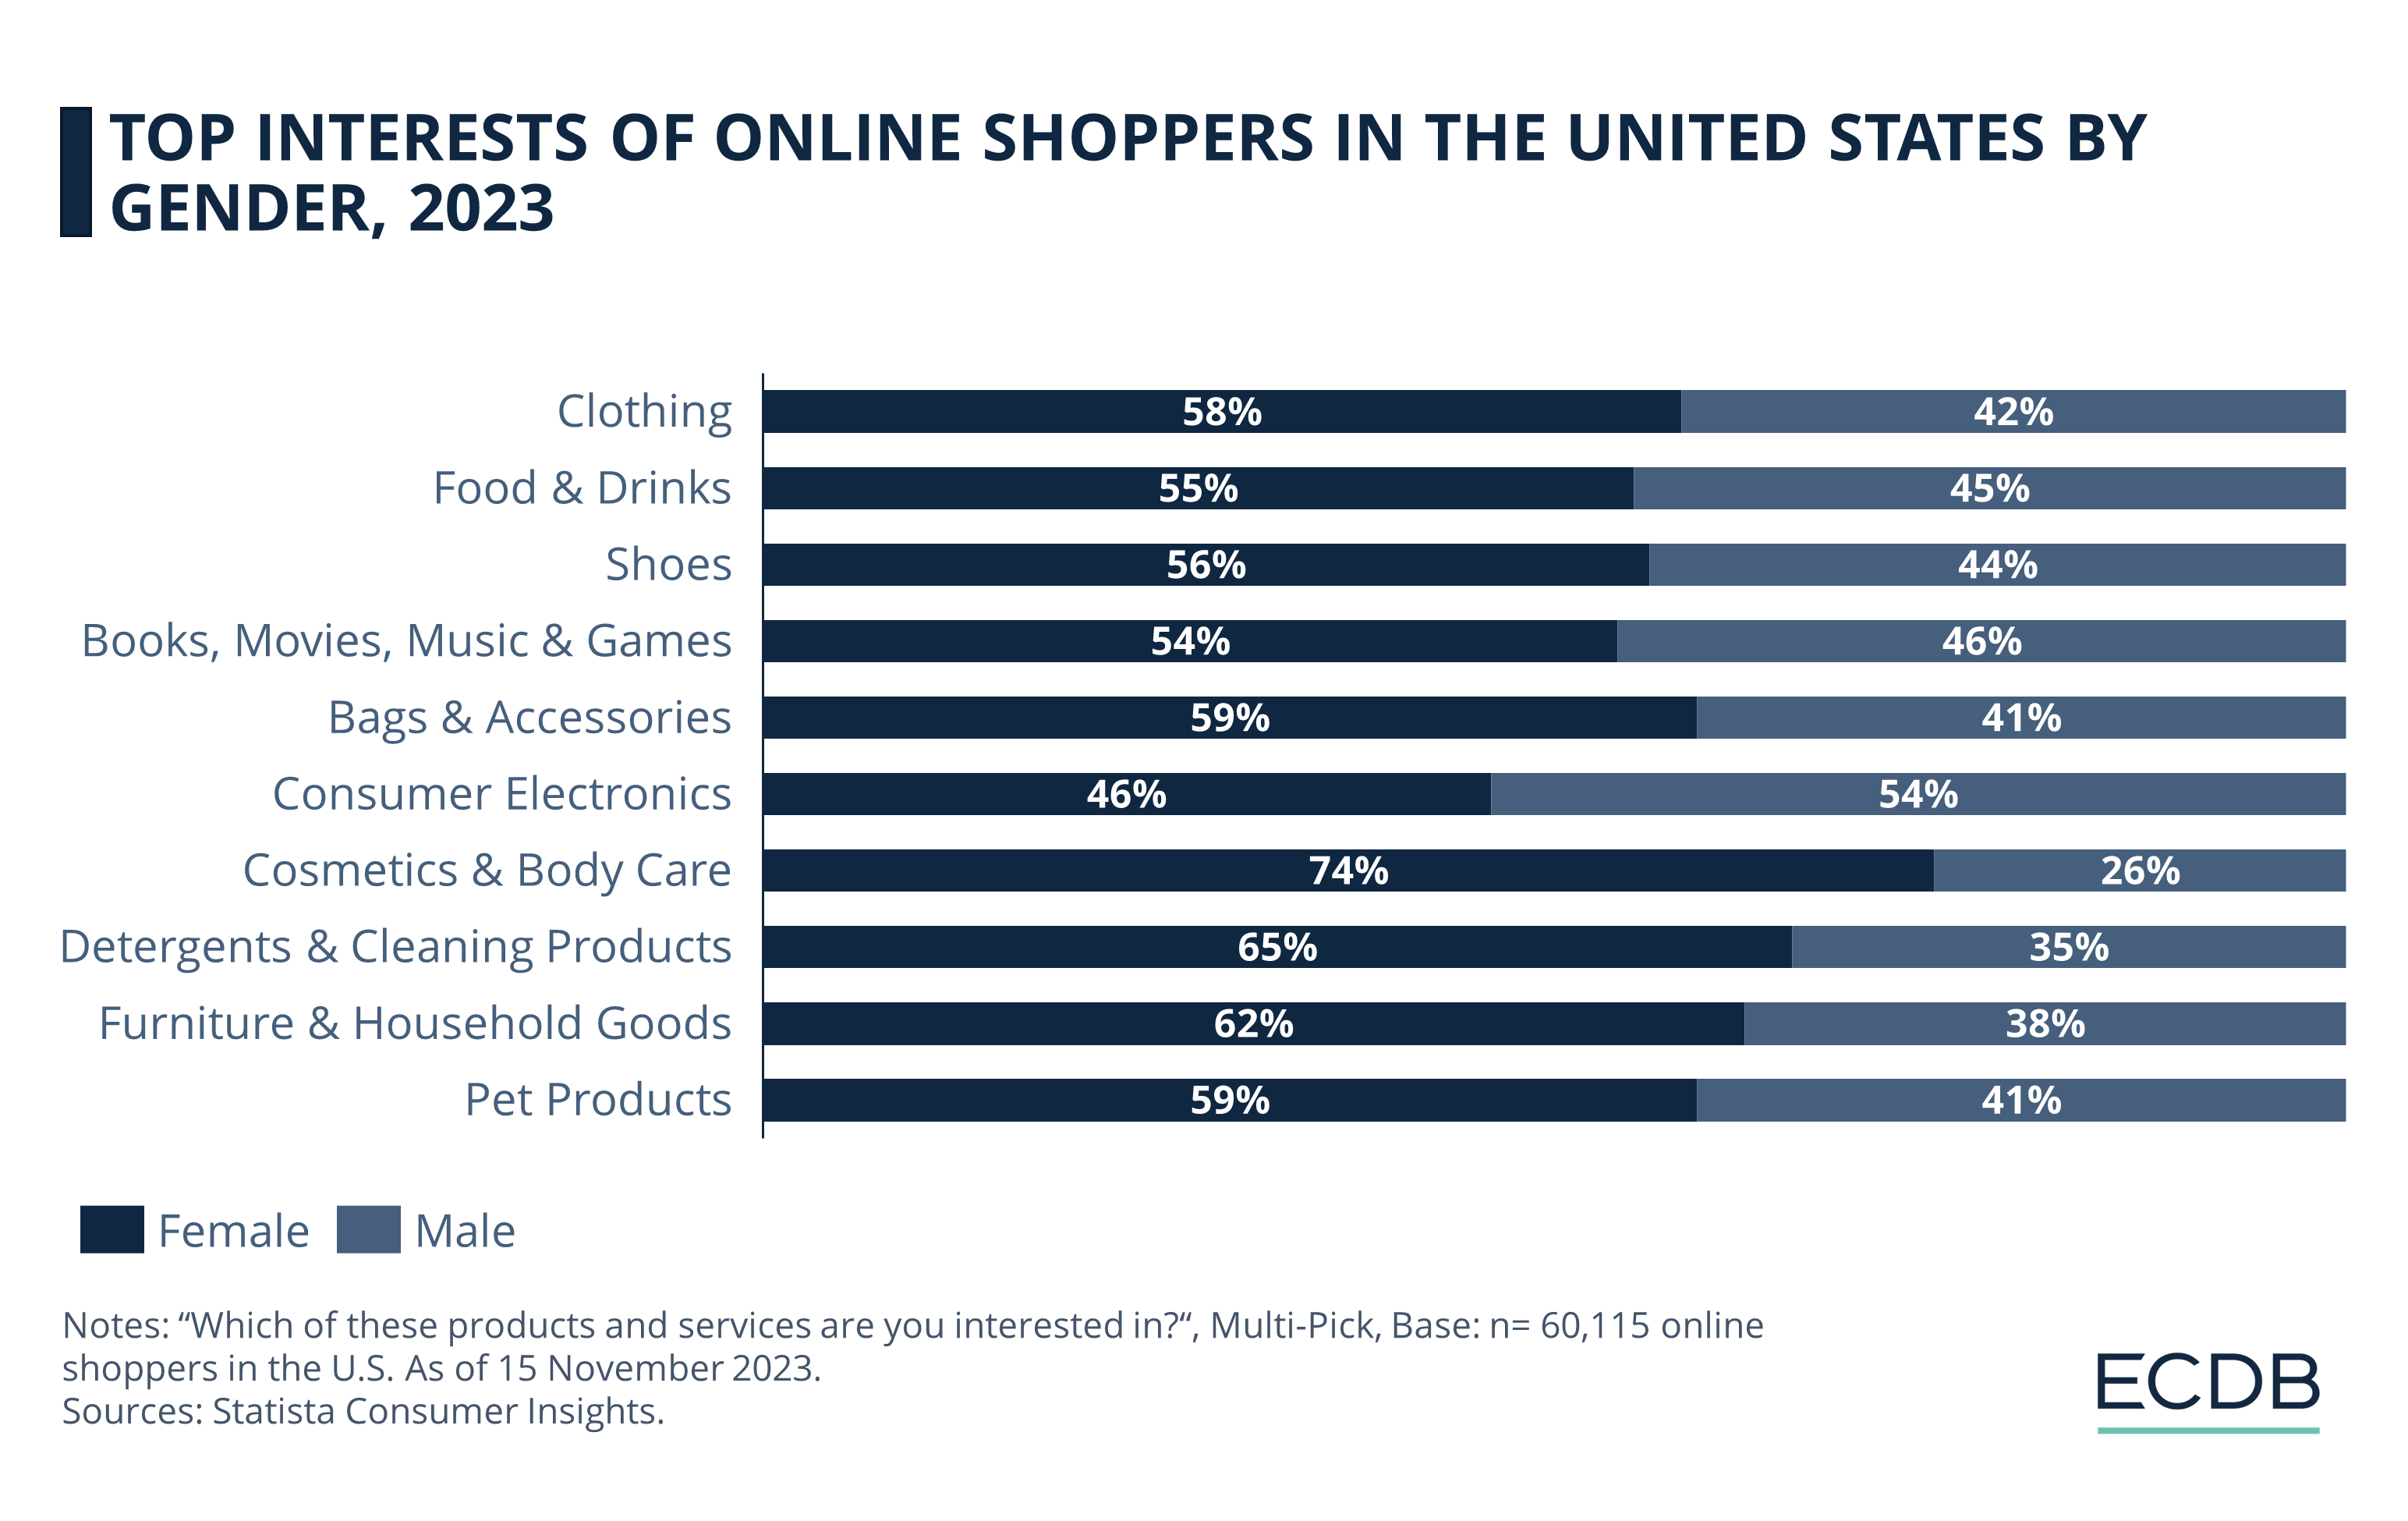 Top Interests of Online Shoppers in the United States by Gender, 2023